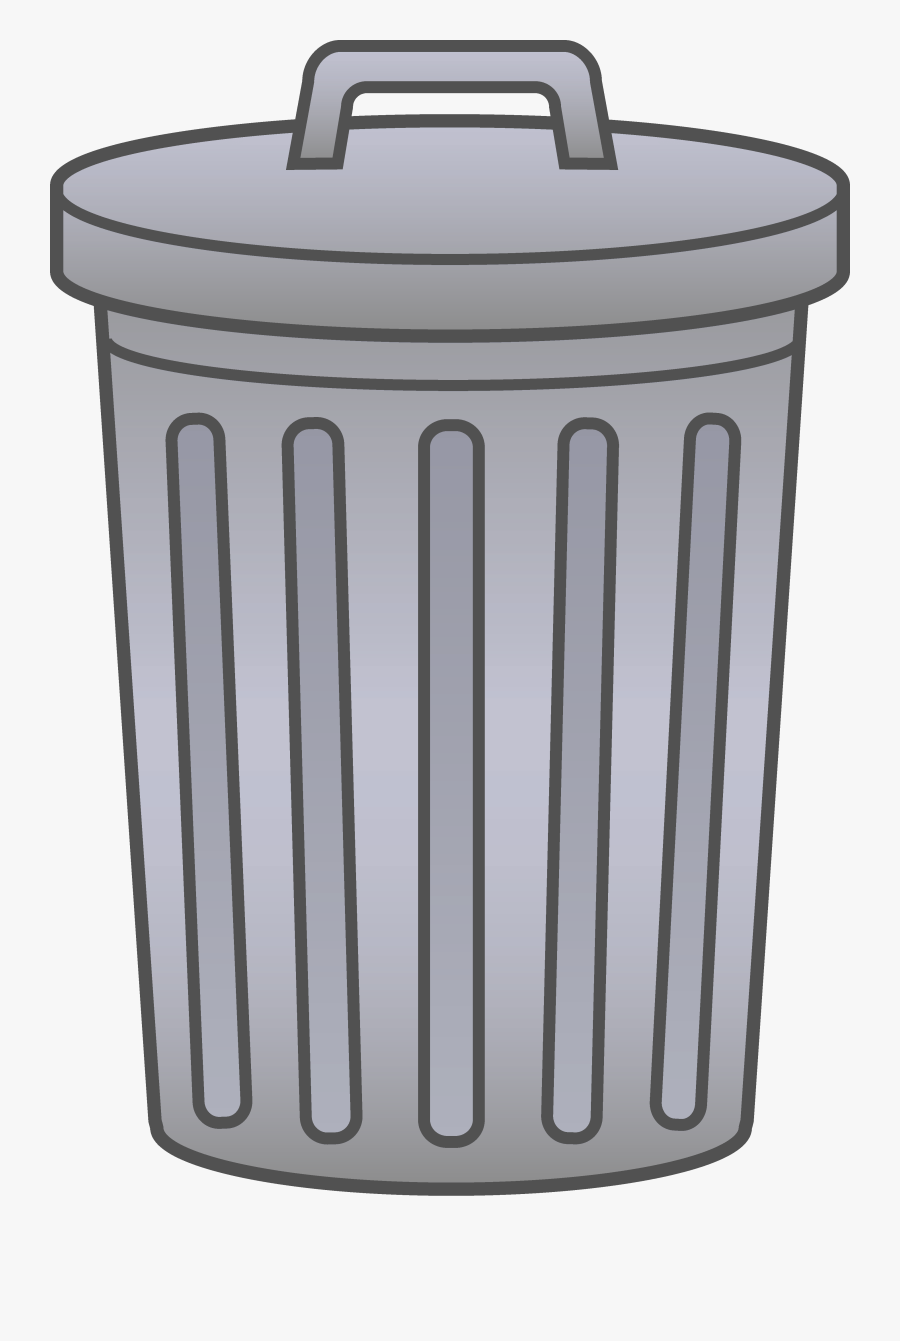 Garbage Cliparts - Trash Can Clipart Png, Transparent Clipart